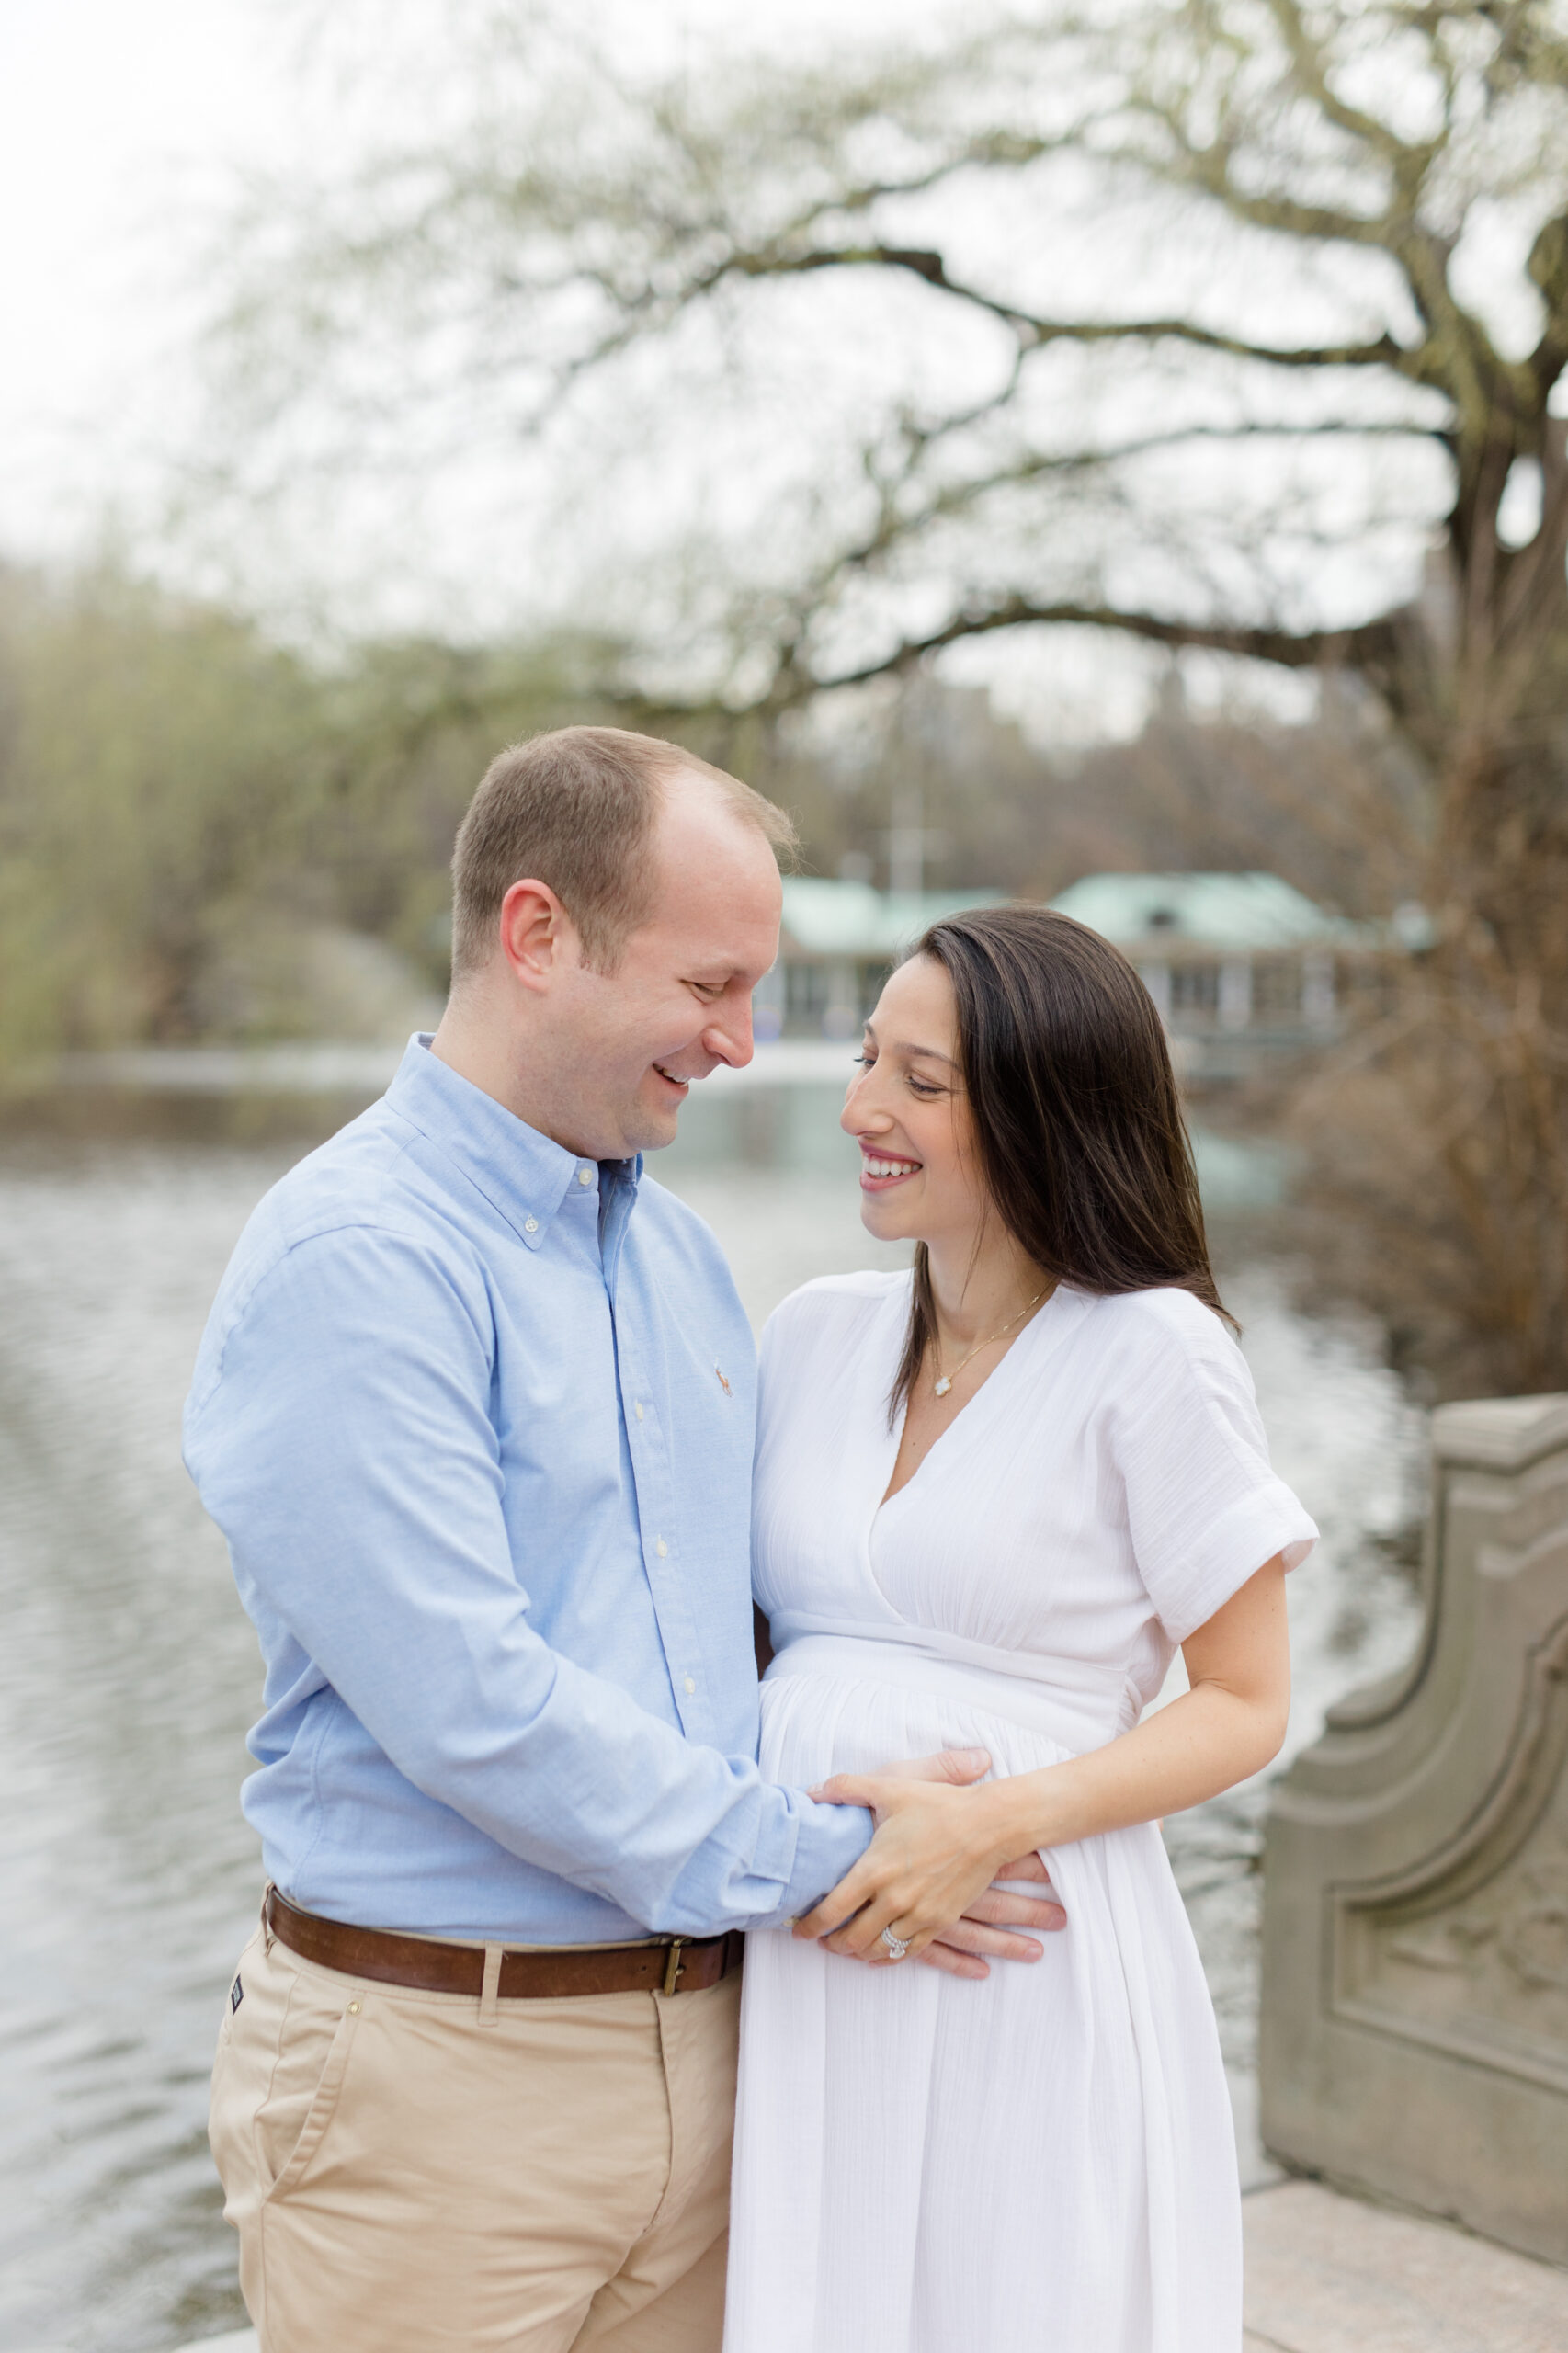 An expecting couple together in Central Park during a New York City maternity photography session with Jacqueline Clair Photography